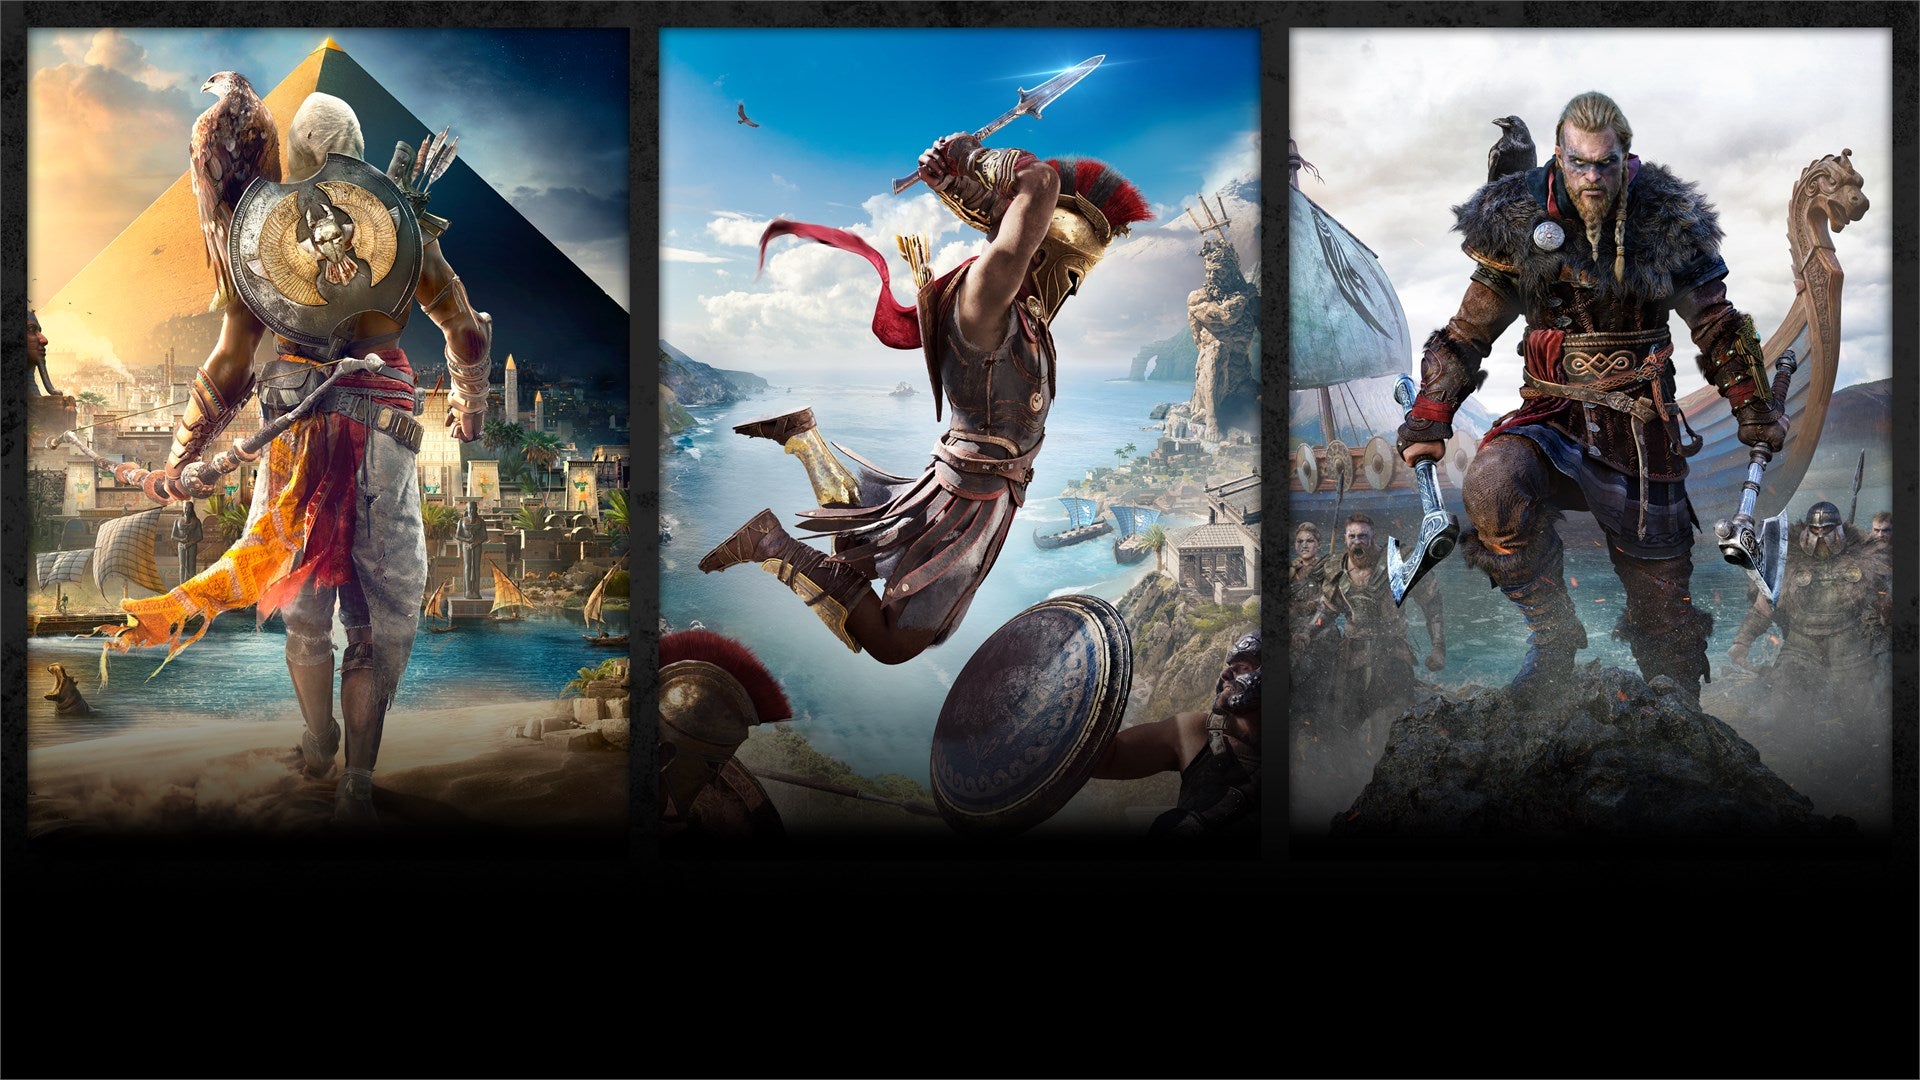 Image for This Assassin’s Creed Cyber Monday bundle is half price on the Microsoft Store